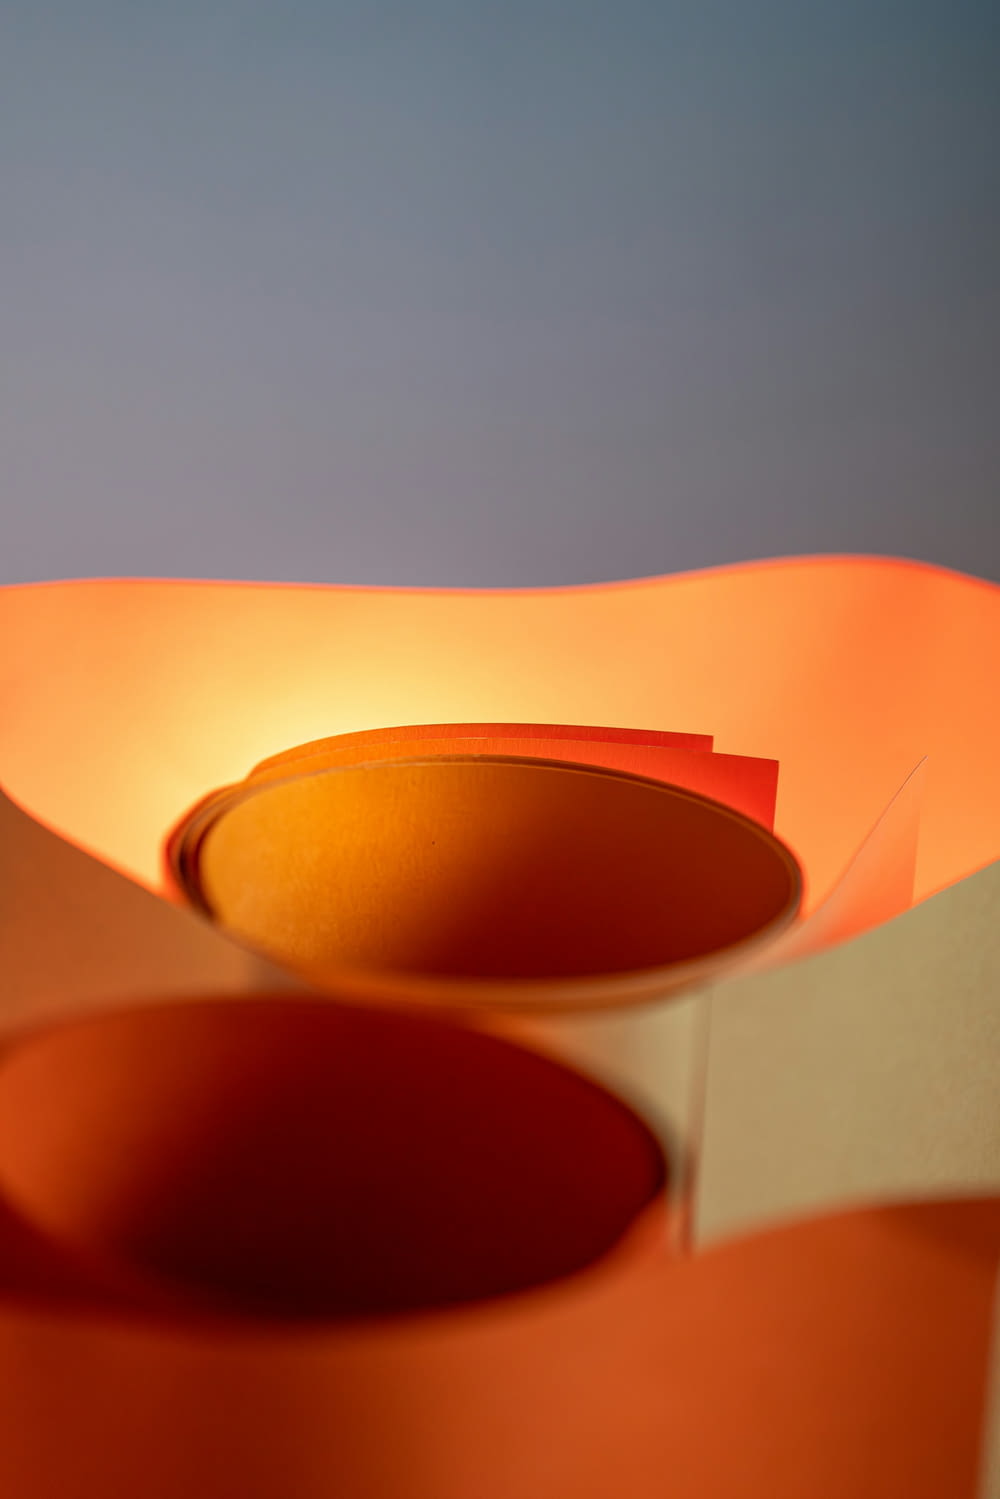 a close up of a light fixture with a blue sky in the background